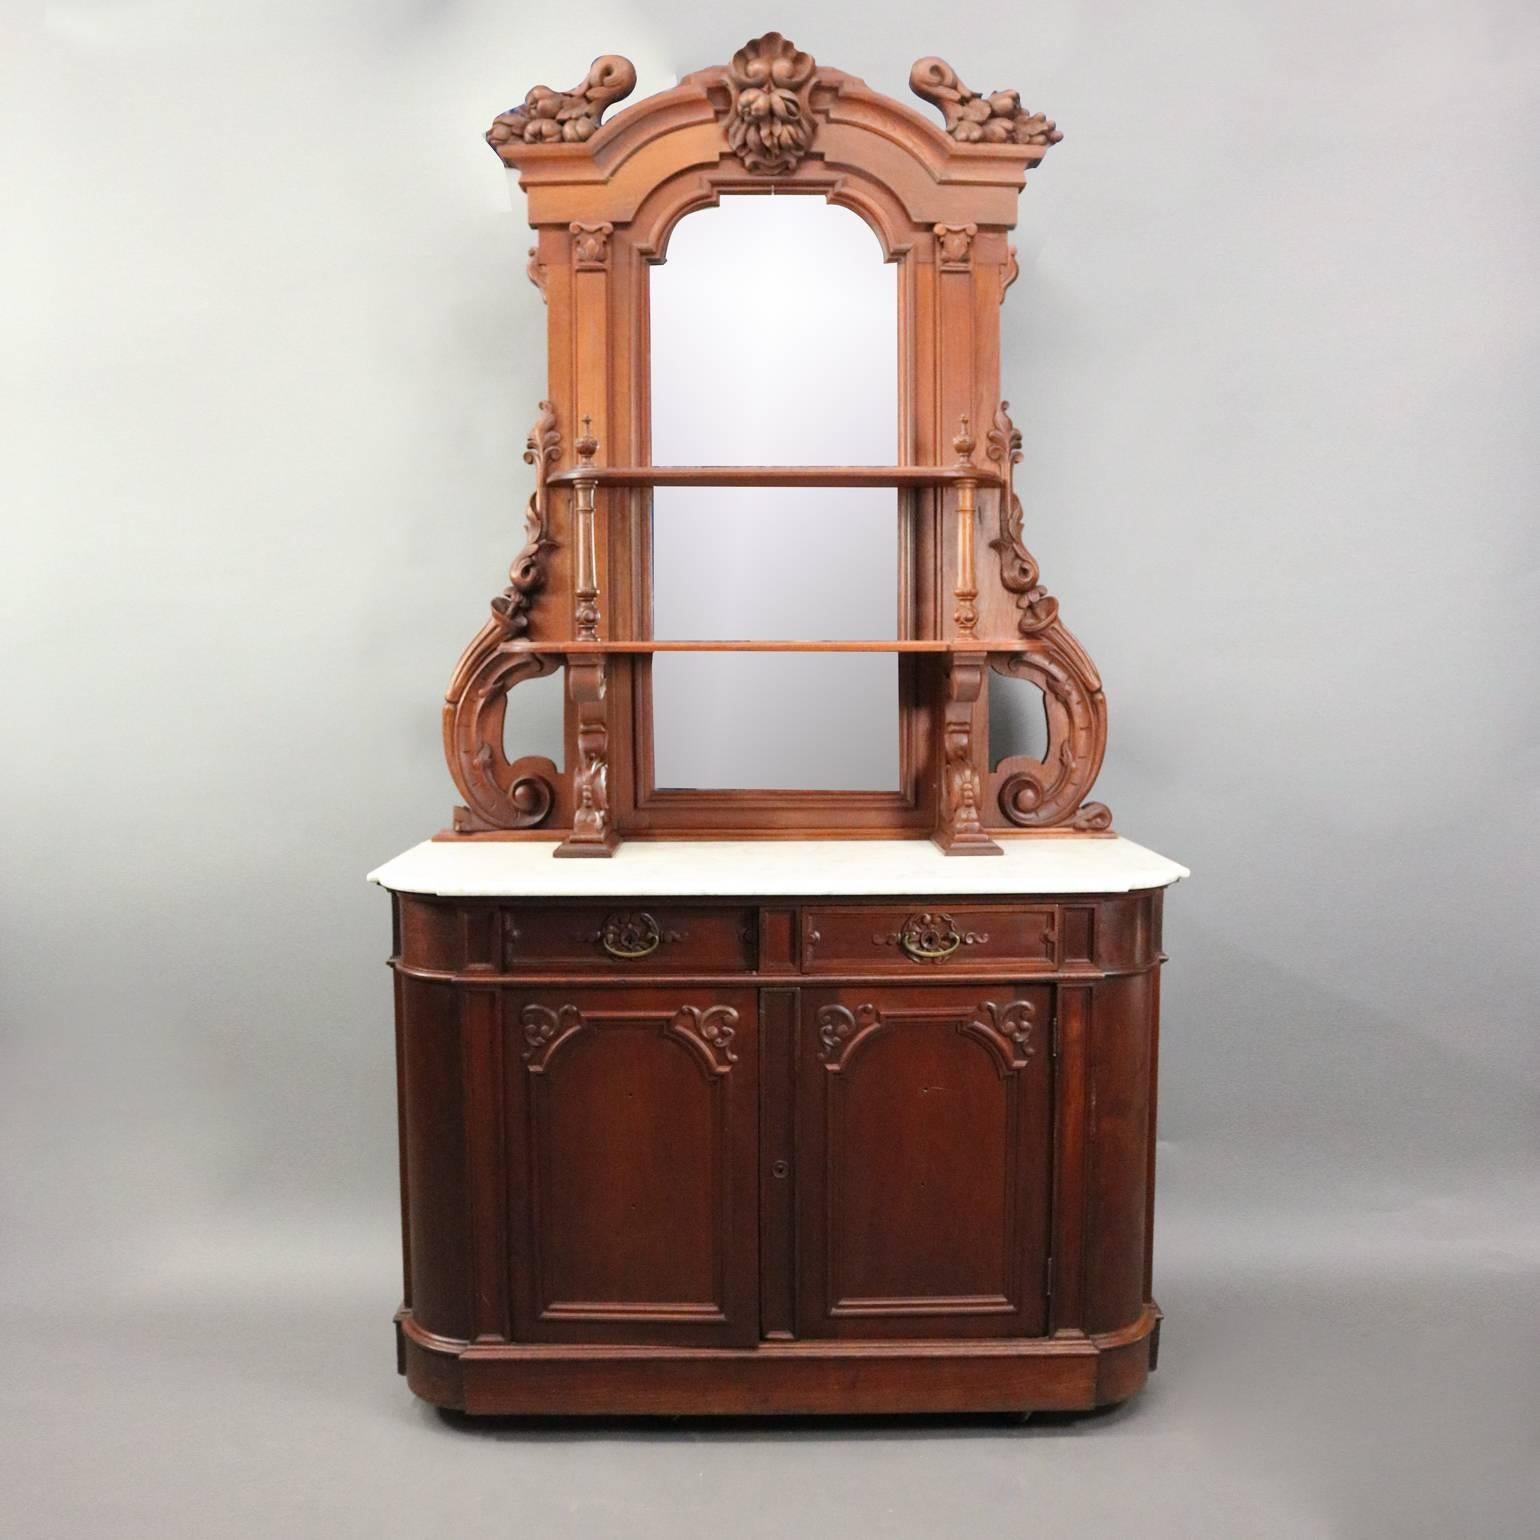 Antique Renaissance Revival sideboard features heavily carved walnut case with volute, fruit and nut motif, marble top, and shelved mirrored backsplash, circa 1880.

***DELIVERY NOTICE – Due to COVID-19 we are employing NO-CONTACT PRACTICES in the